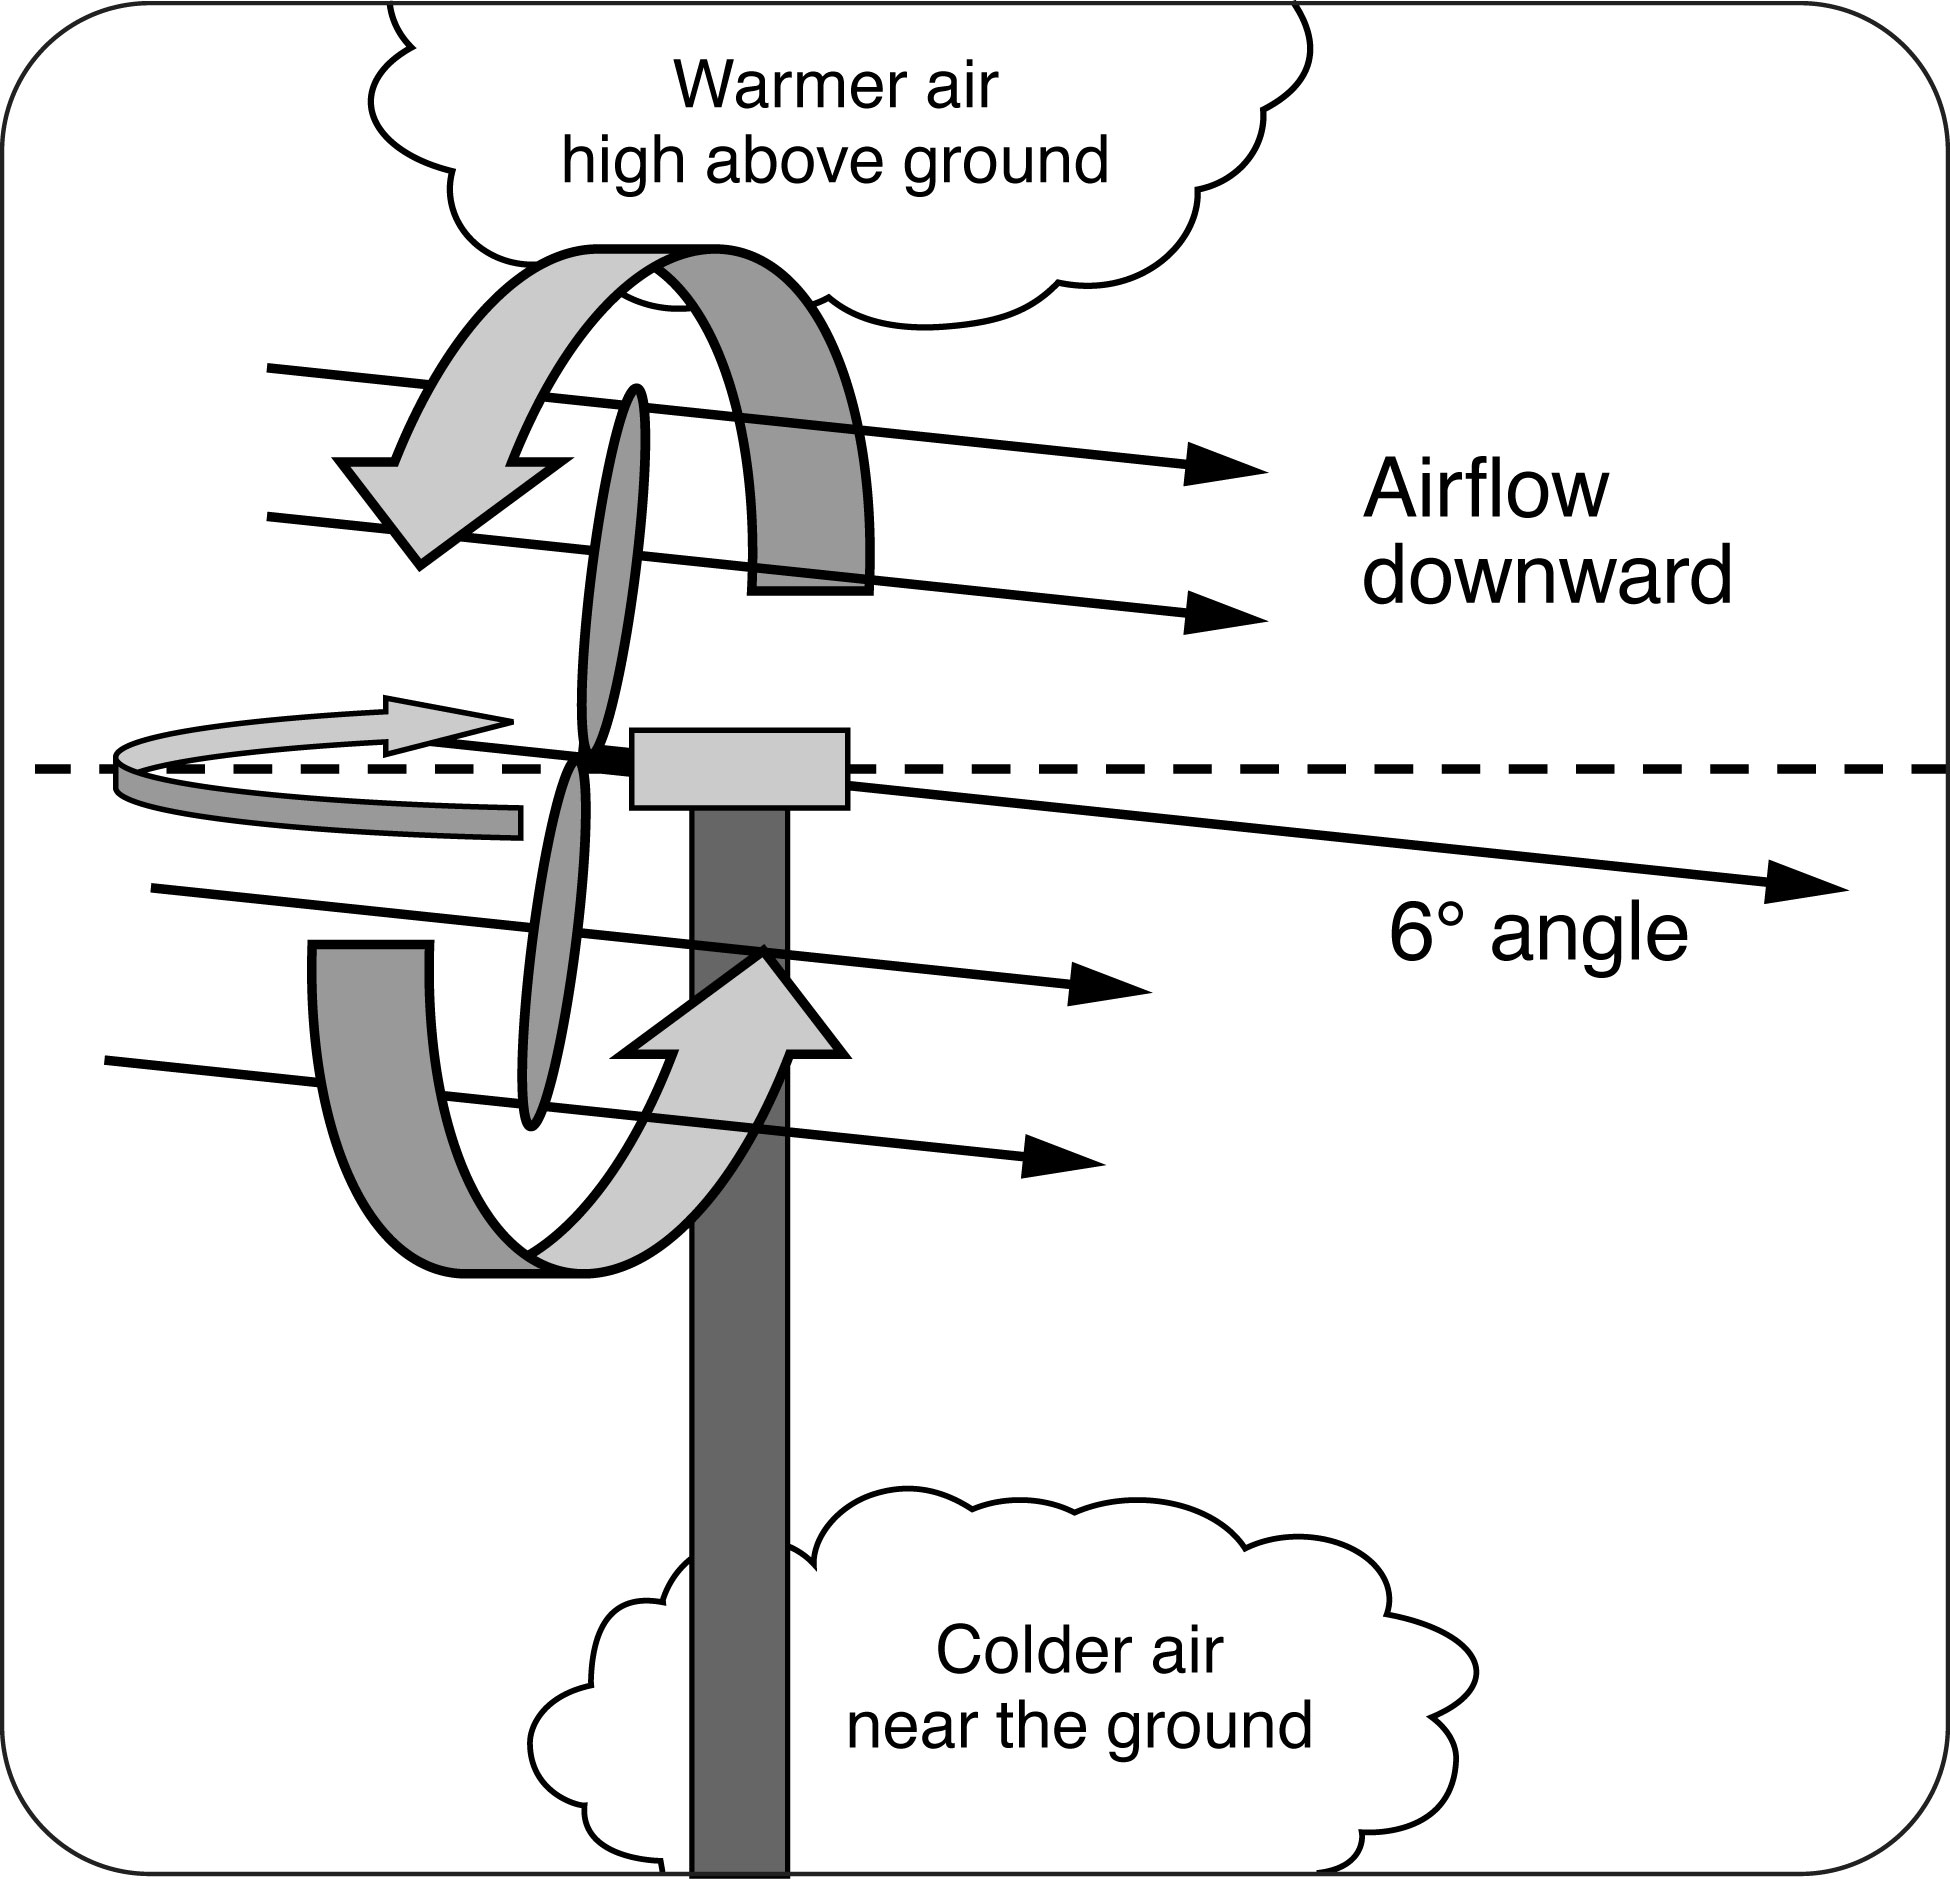 Figure 2: This is a schematic of a wind machine showing how the blades rotate, while the entire head of the fan rotates about the vertical axis of the tower. It operates in much the same way as a table top fan you might purchase from a store that blows outward, but at the same time rotates, blowing in all directions around the room over time.